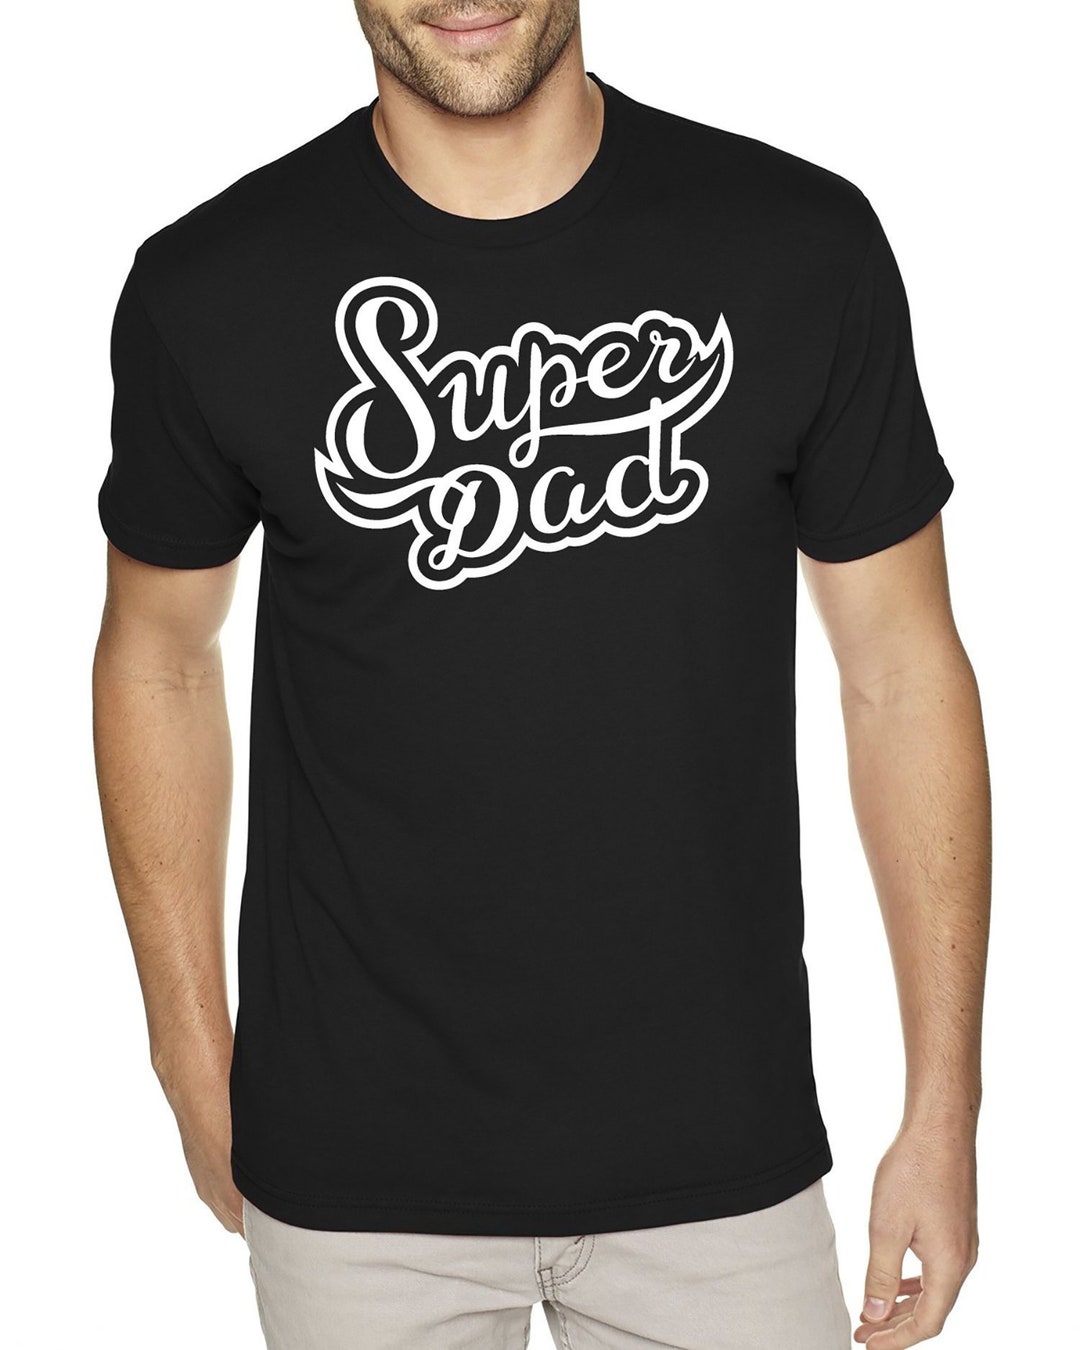 Fathers Day Gift T-shirt Super Dad Shirt Fathers Gift Tshirt - Etsy